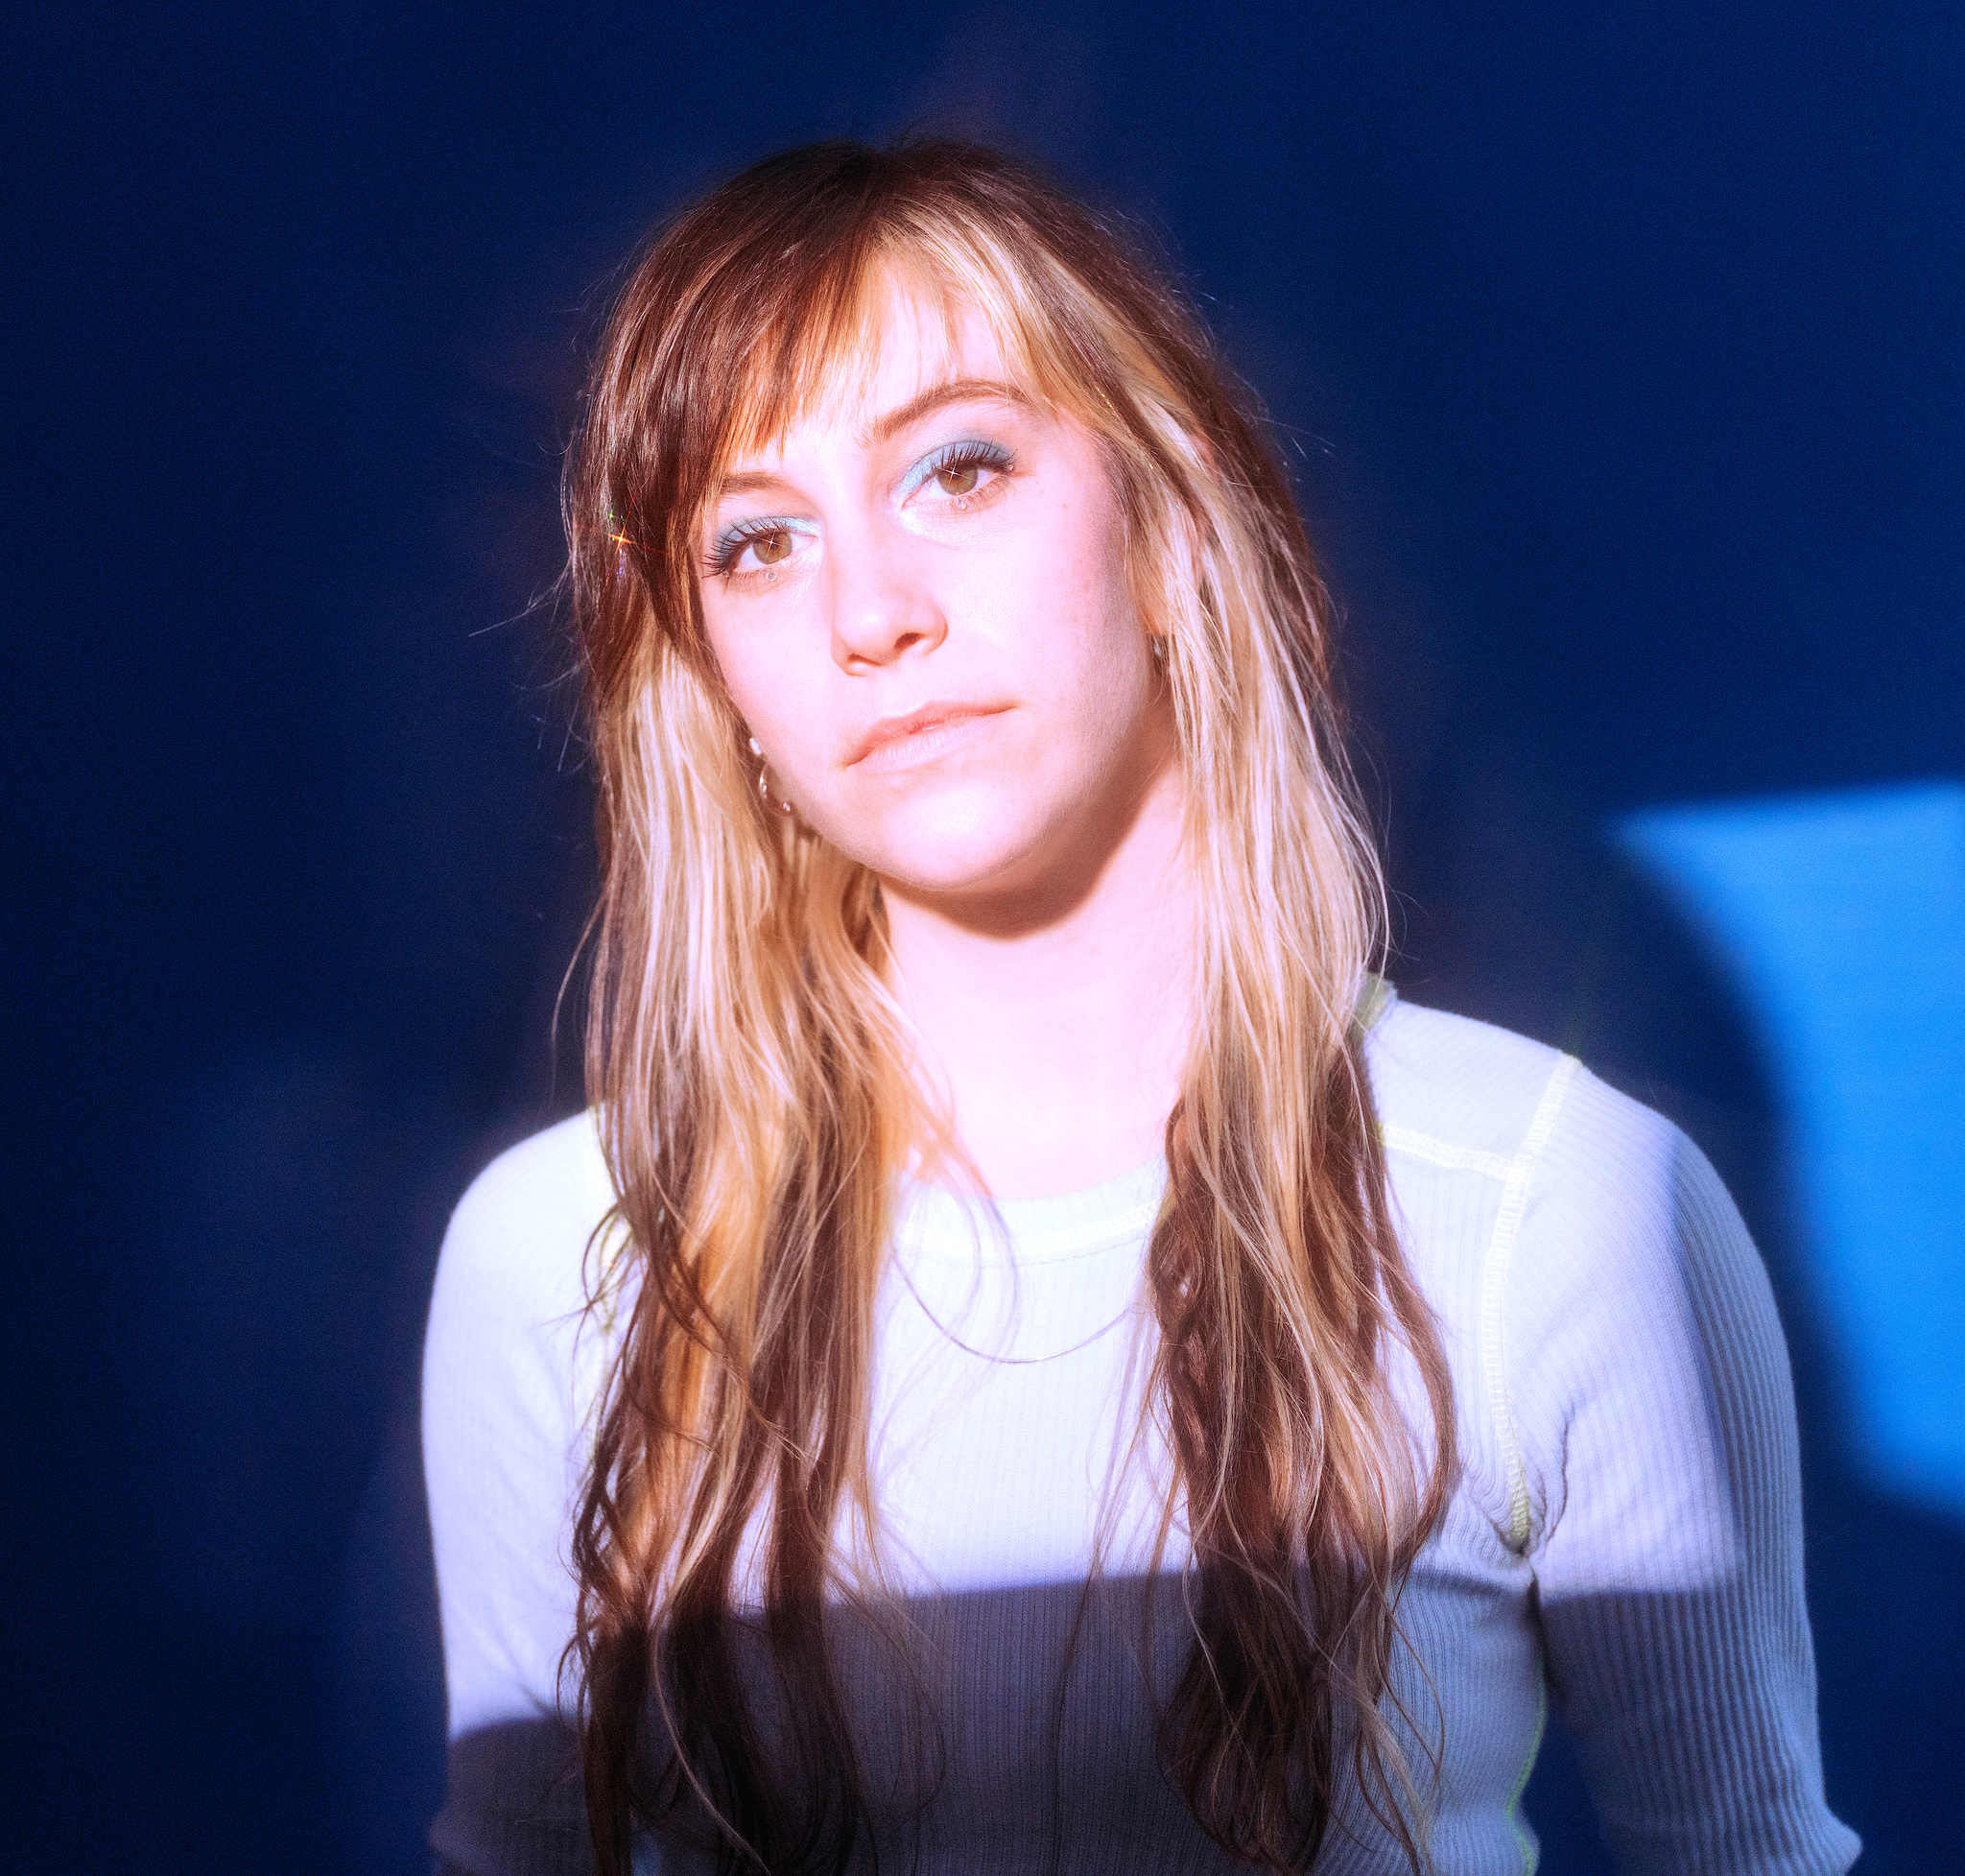 A portrait of Ellen Winter against a blue background. Bright light falls across Ellen's face as if she is facing an open window. She has long light brown hair that falls down beneath her shoulders. She looks directly at us. 